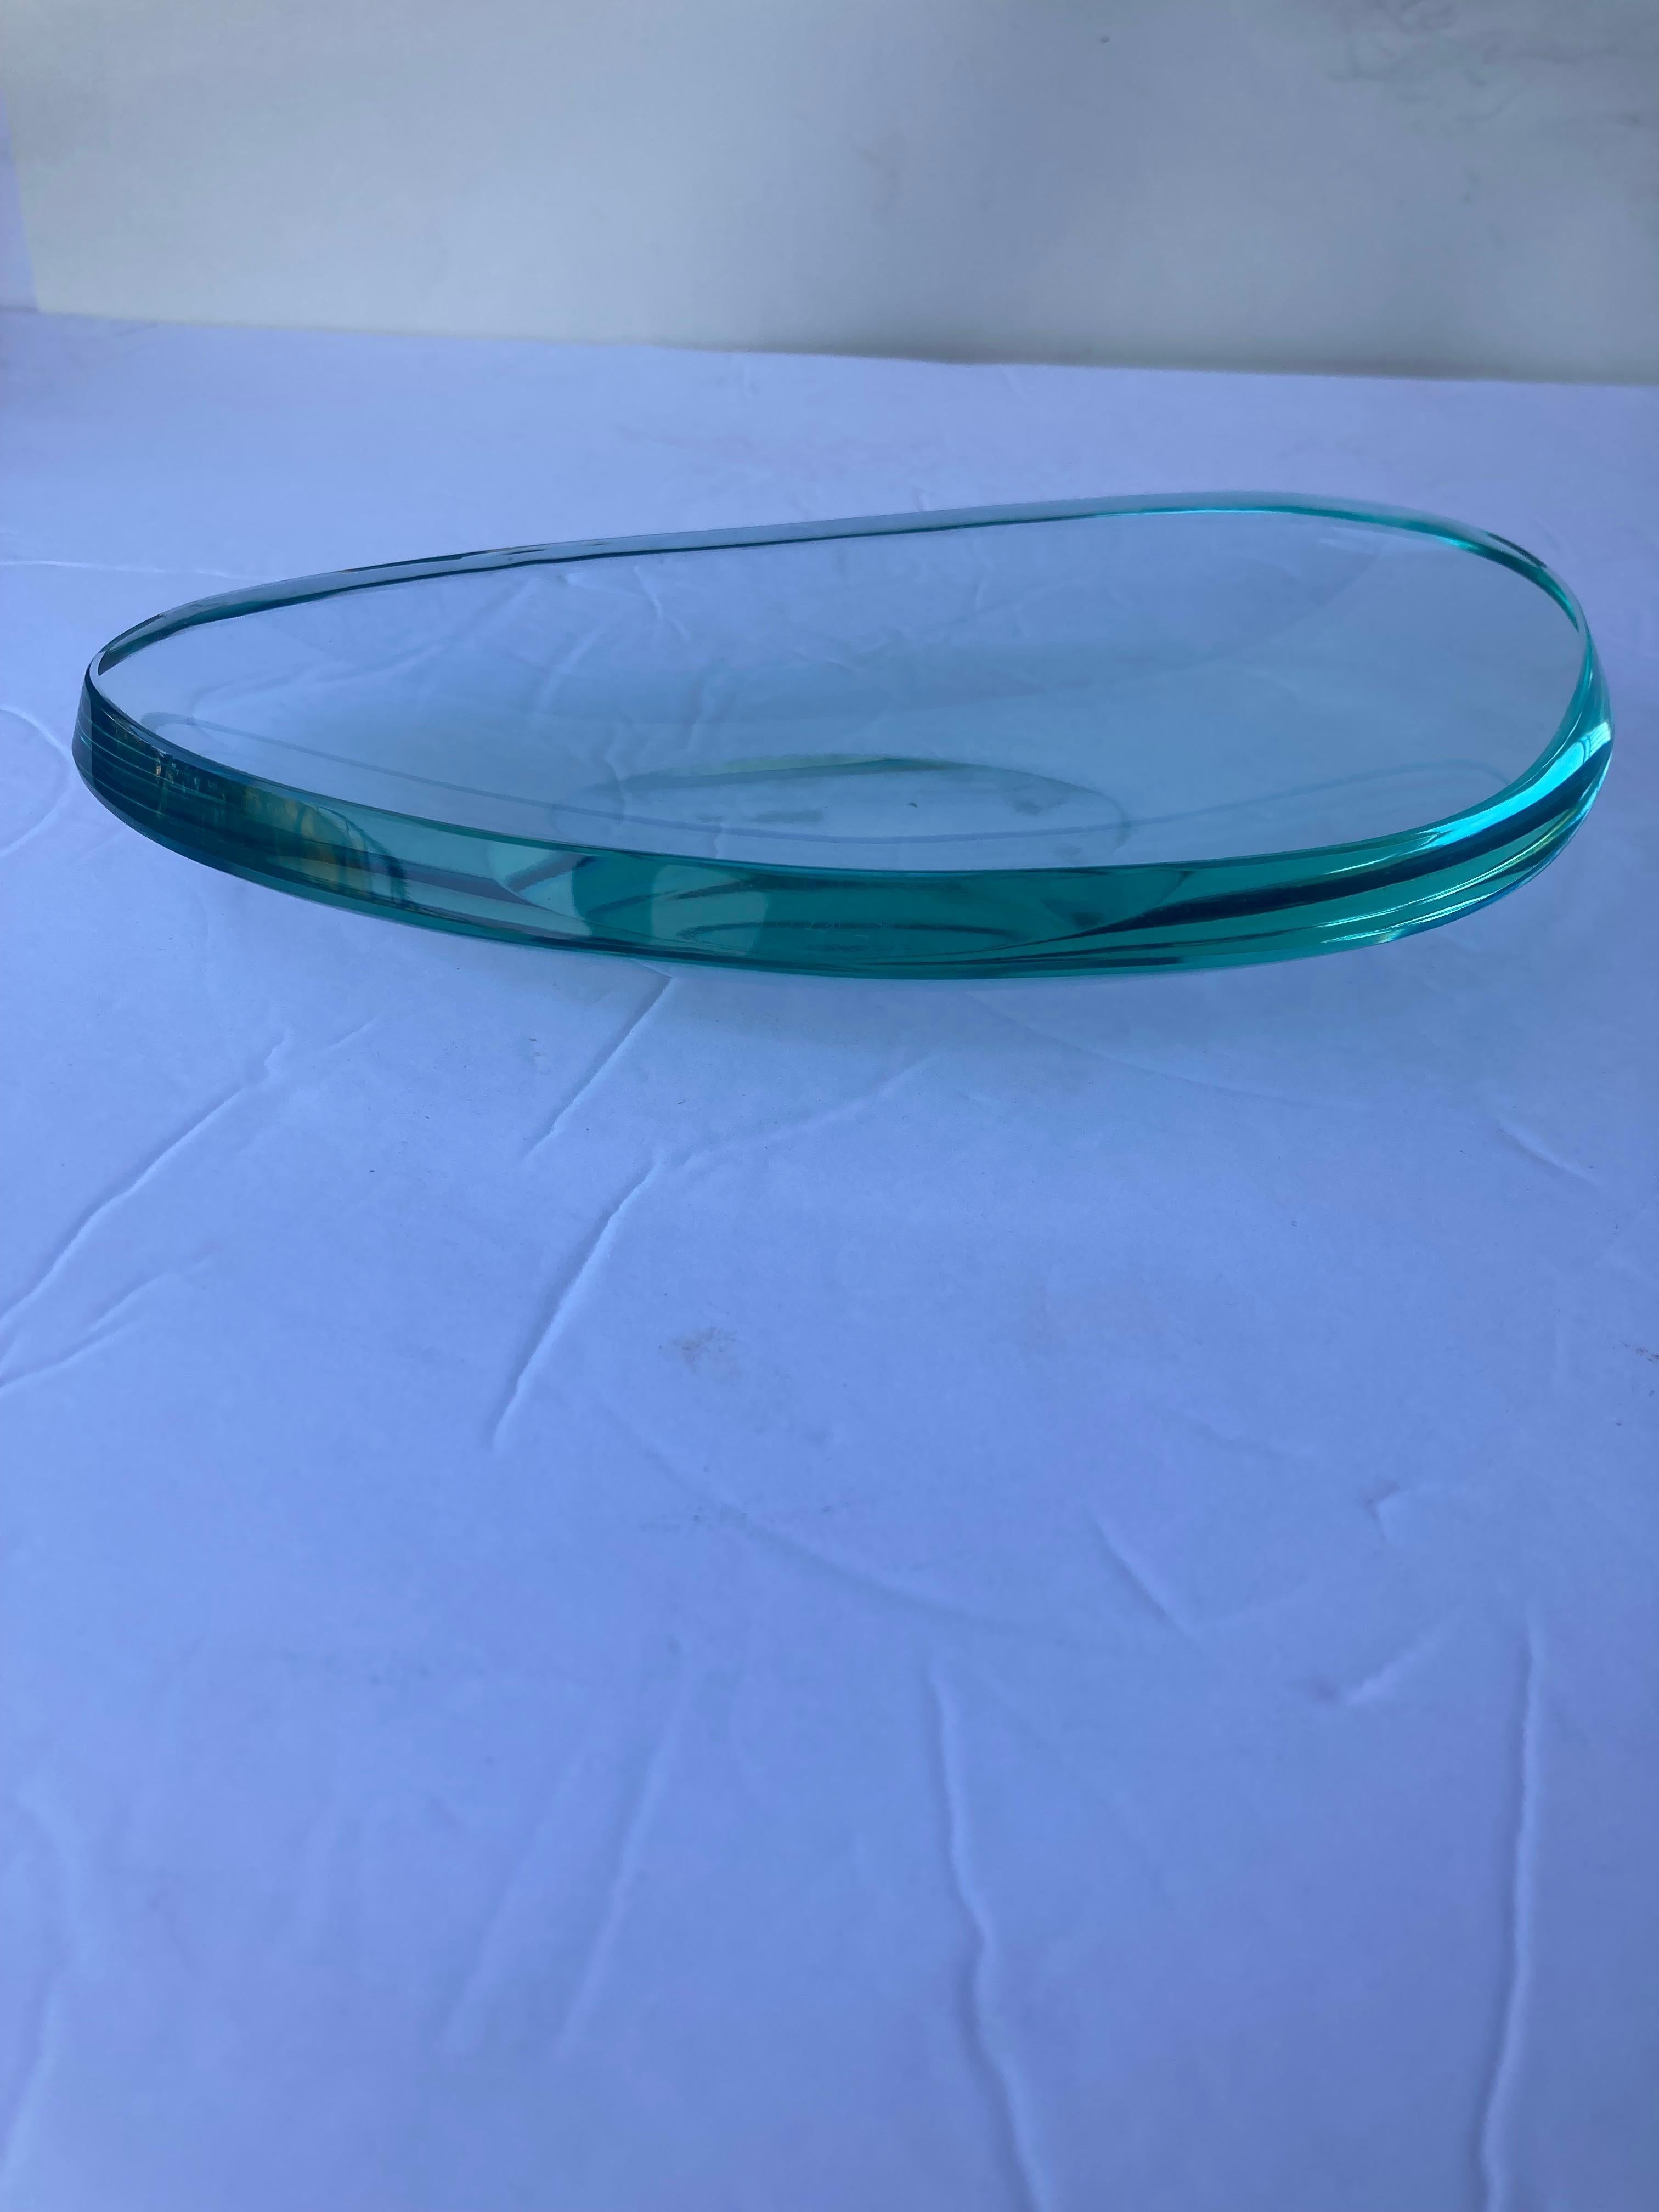 Hand-Crafted Max Ingrand, Attb Glass Bowl/Dish/ Vide Poche, Freeform by Fontana Arte, Fx Mark For Sale